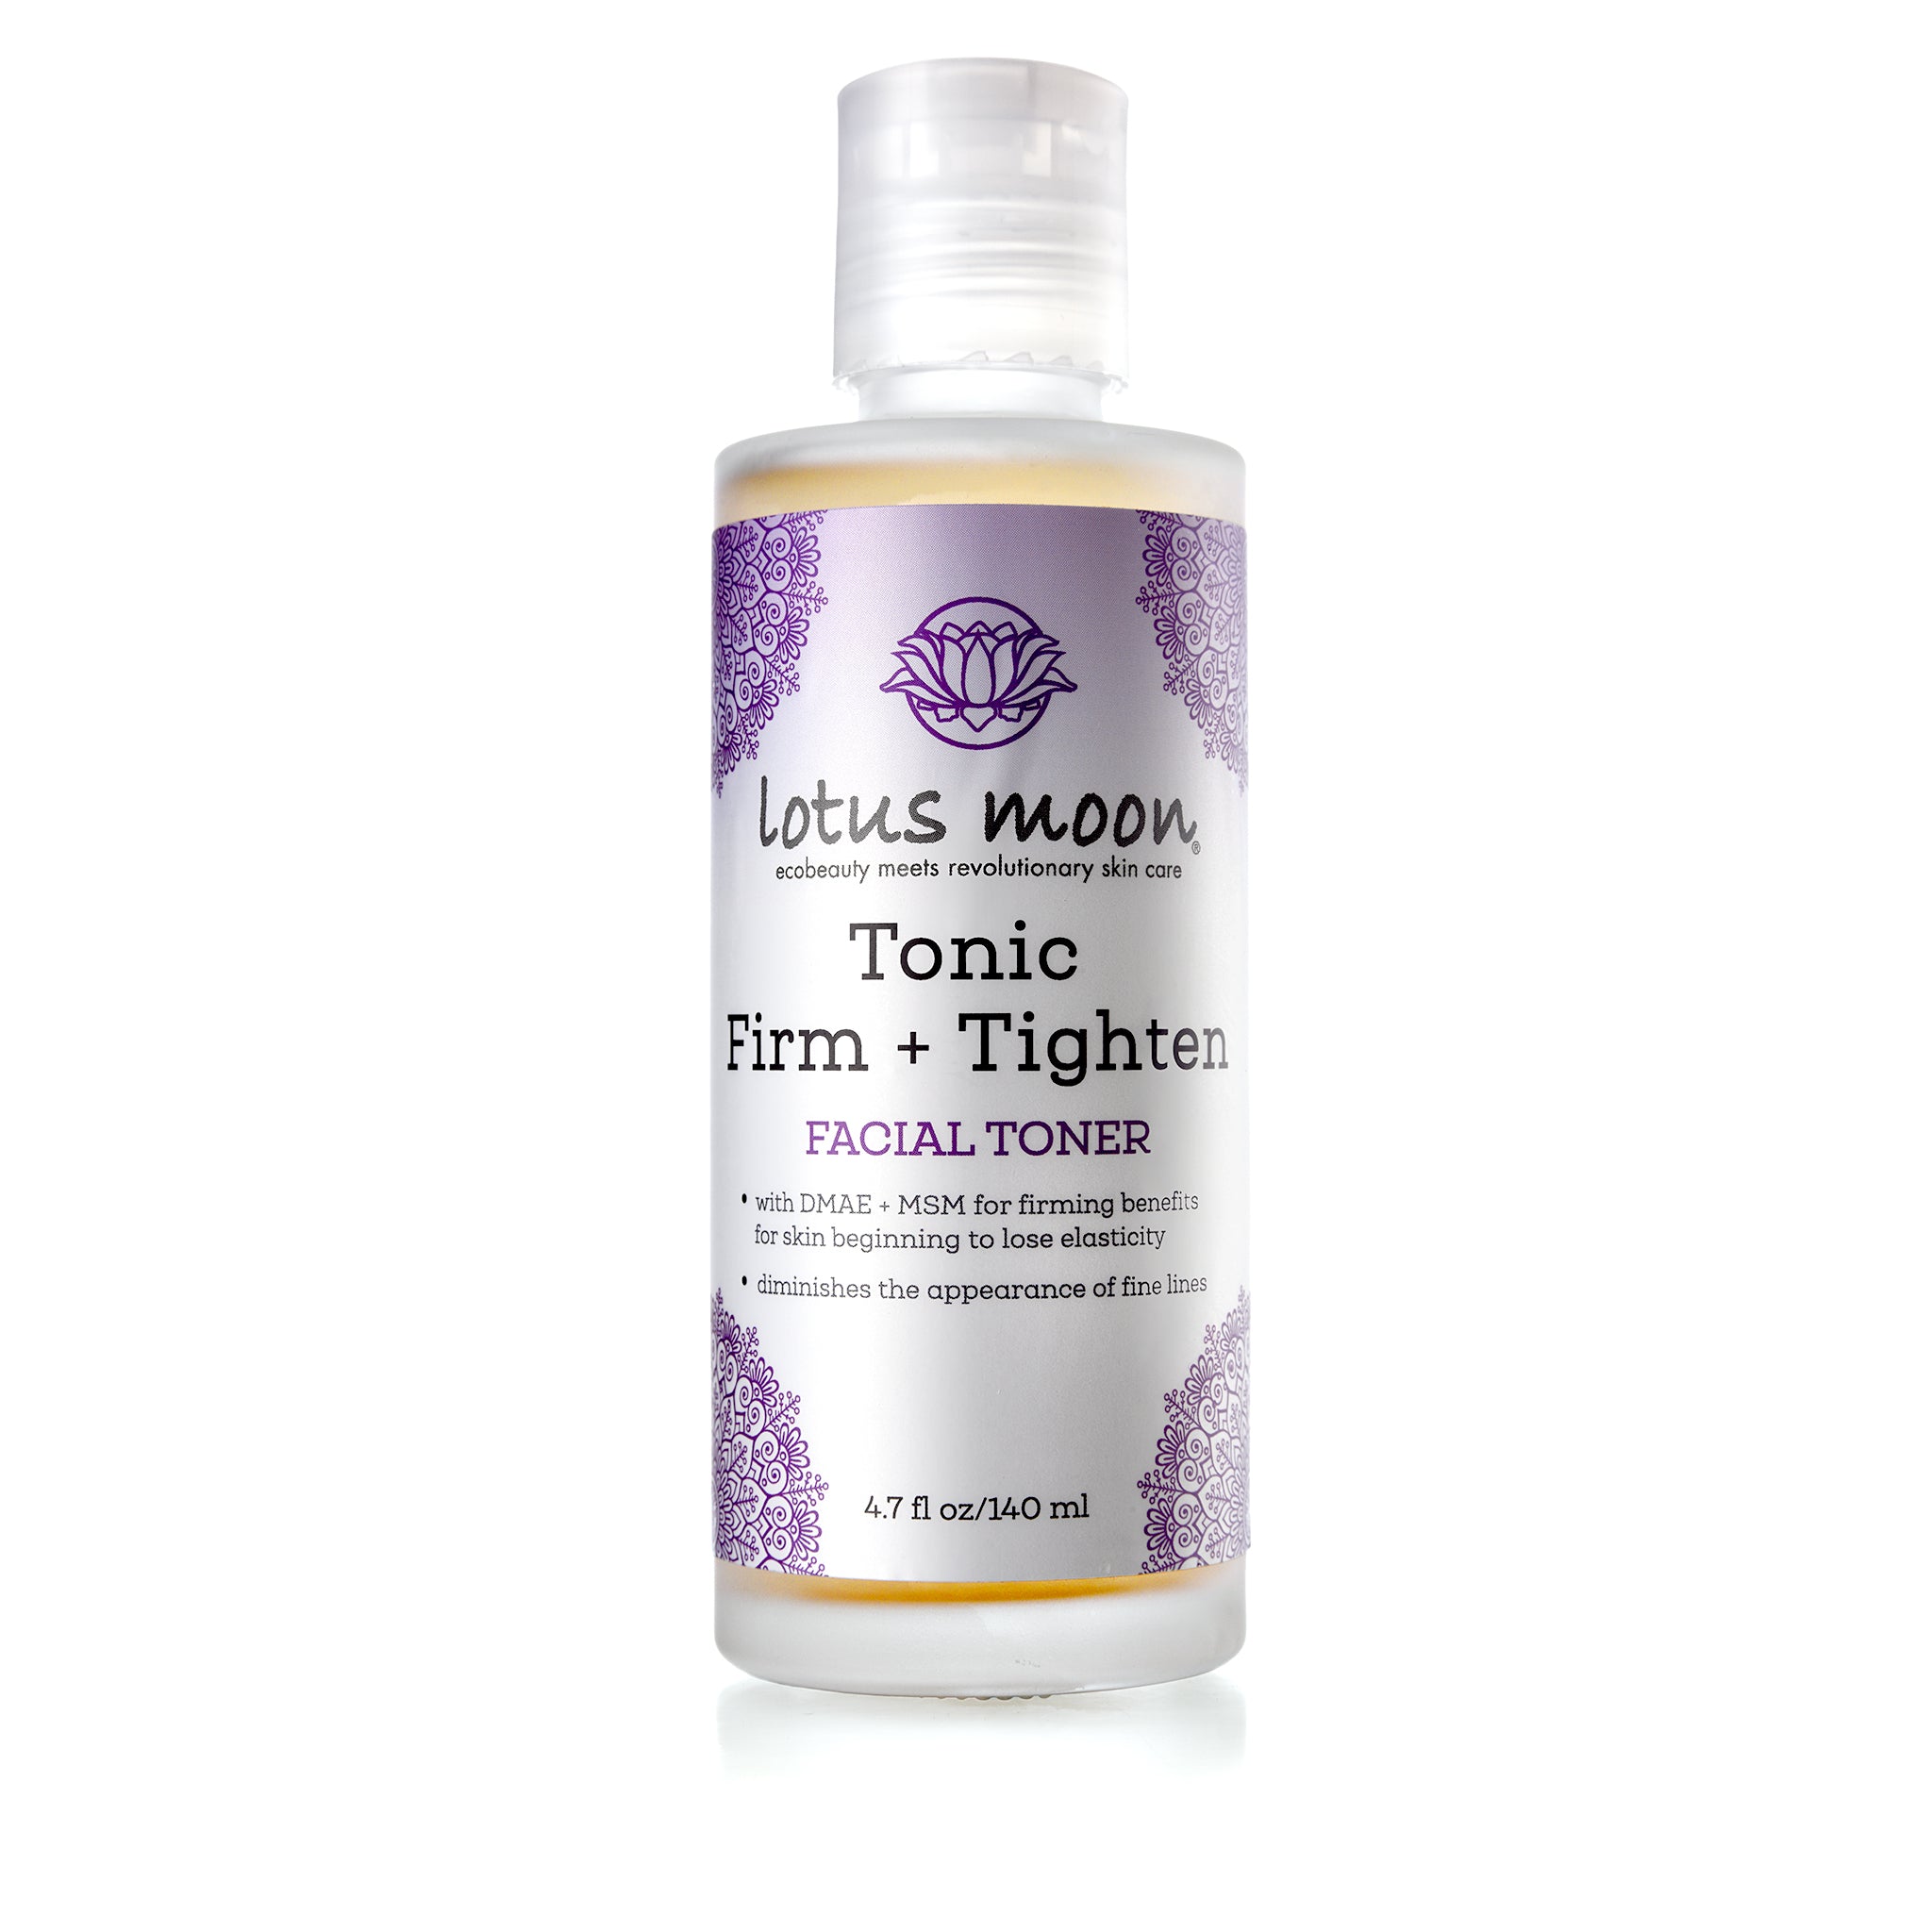 Facial toner for firming and tightening the skin. Contains DMAE.